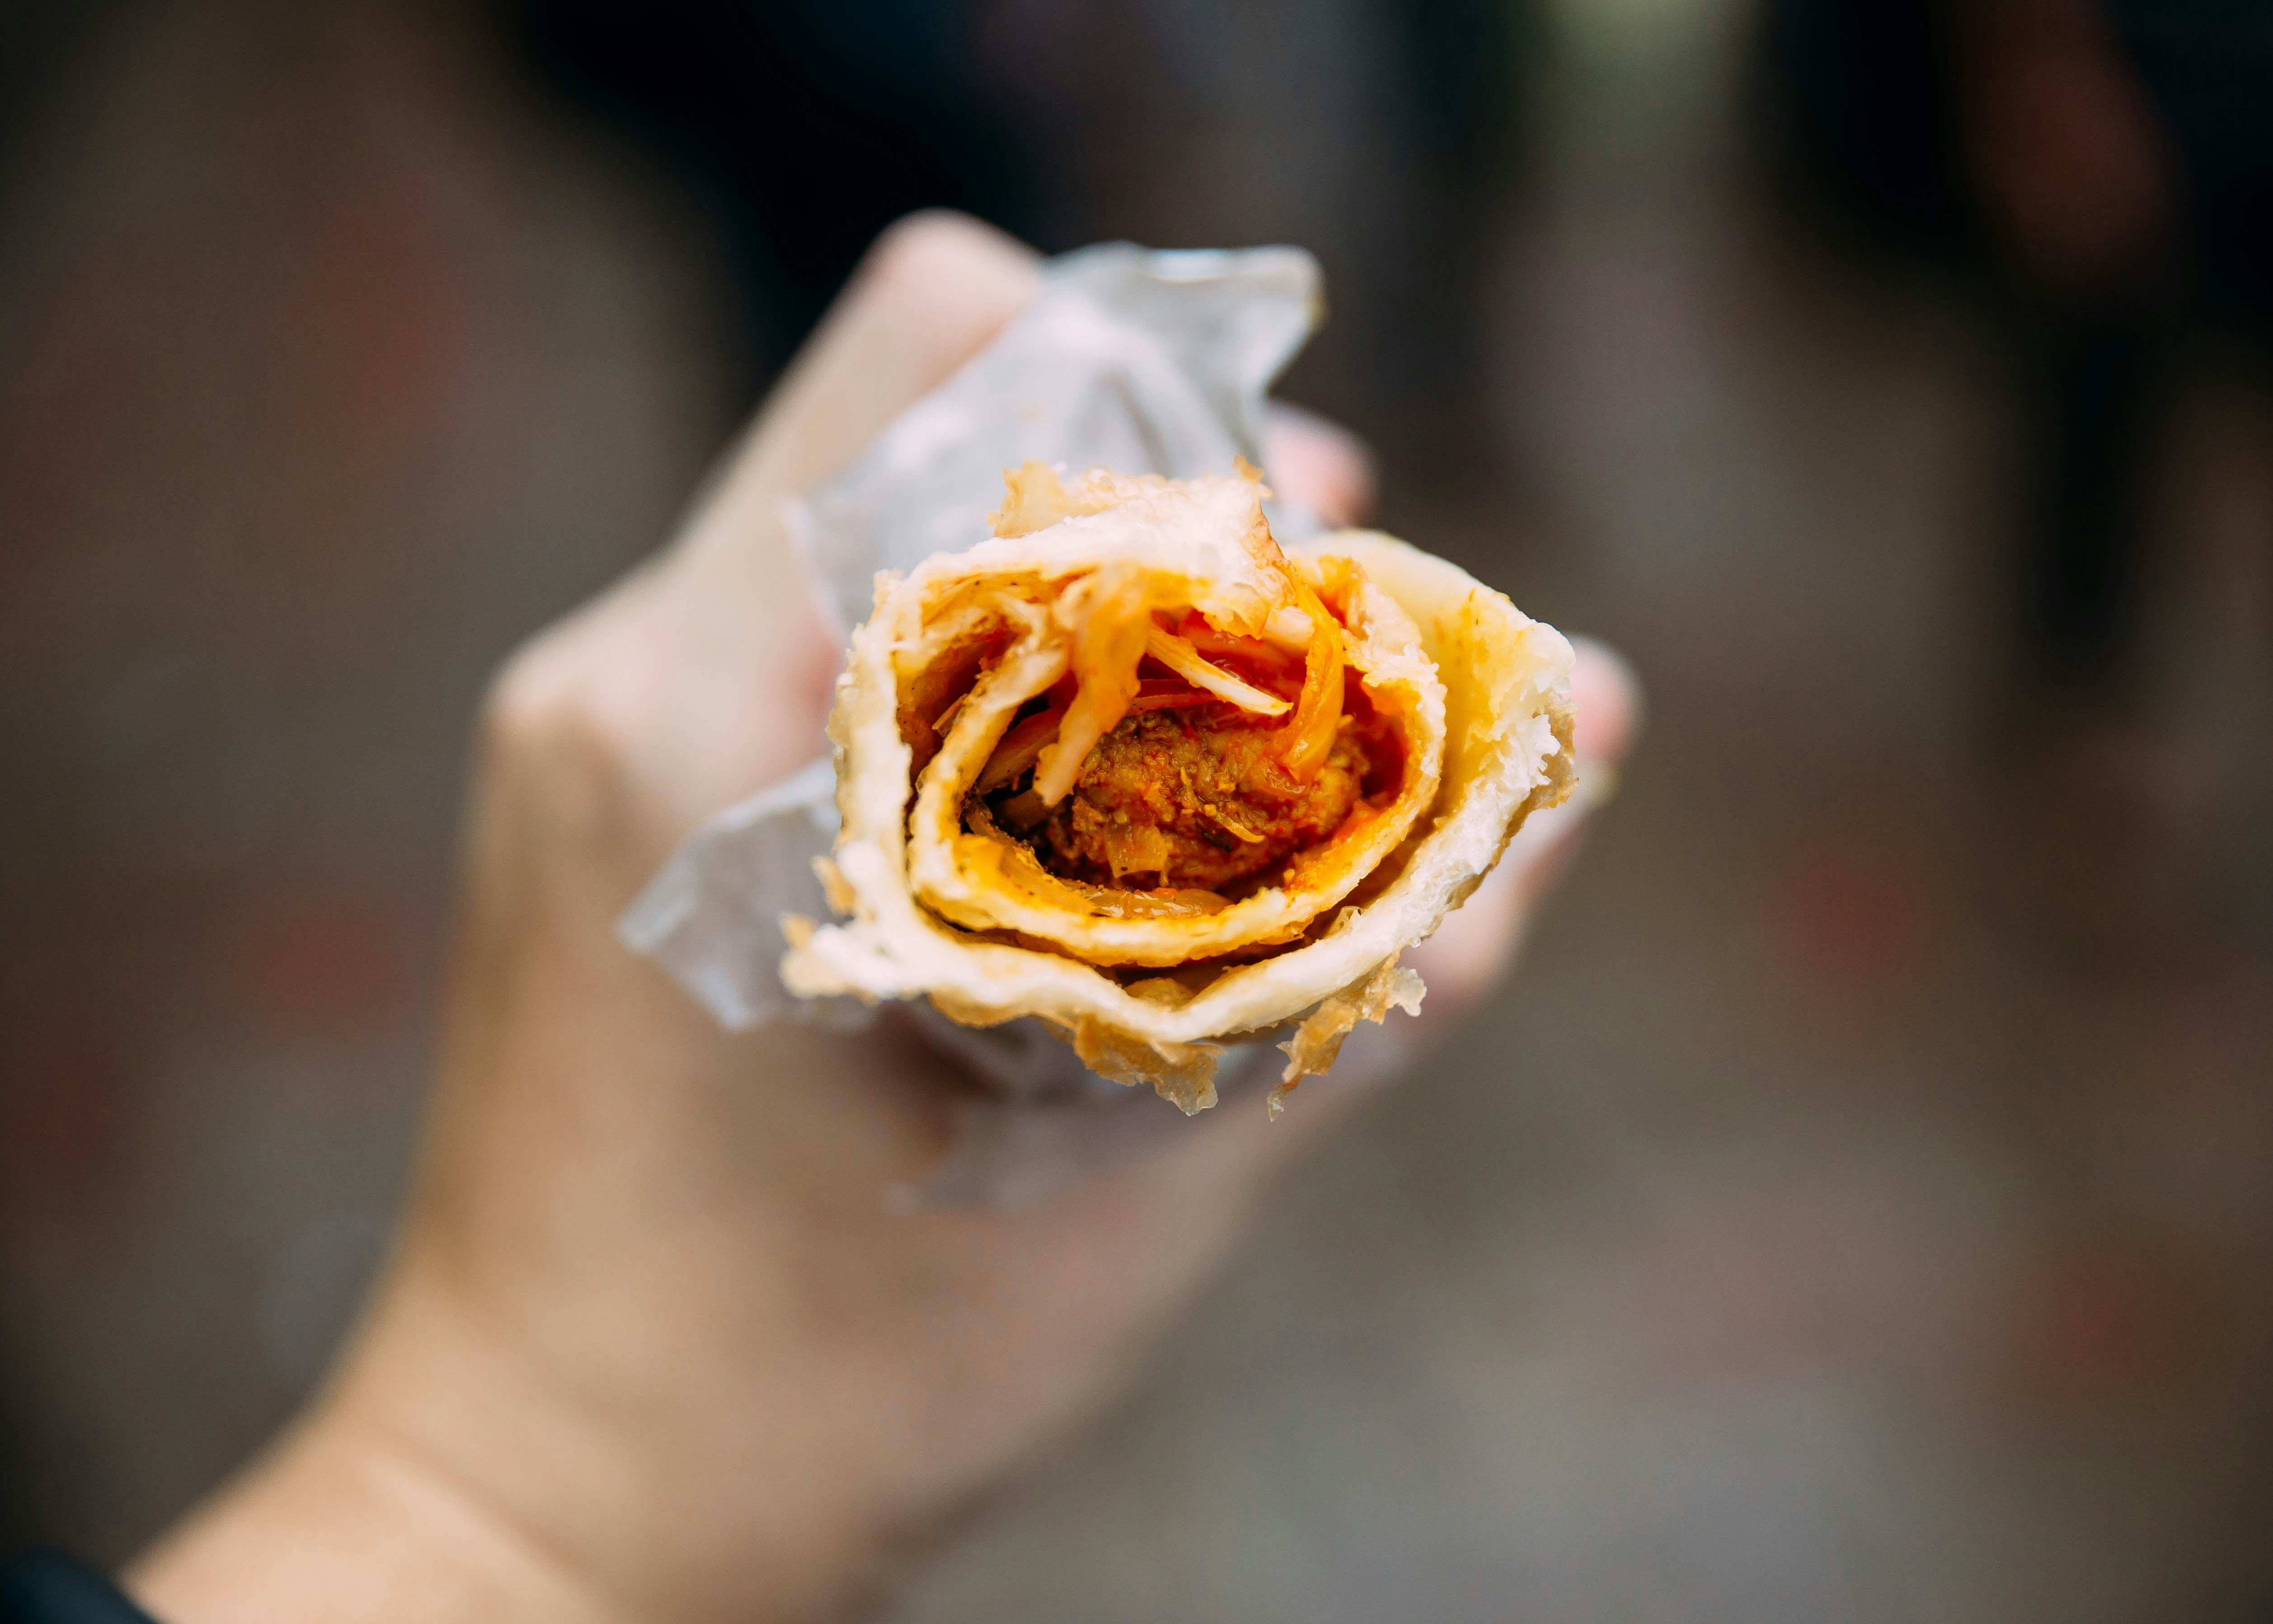 A meat kati roll being gripped by a person's hand, with the open end pointing directly towards the camera. Inside the roll the meat filling is visible.